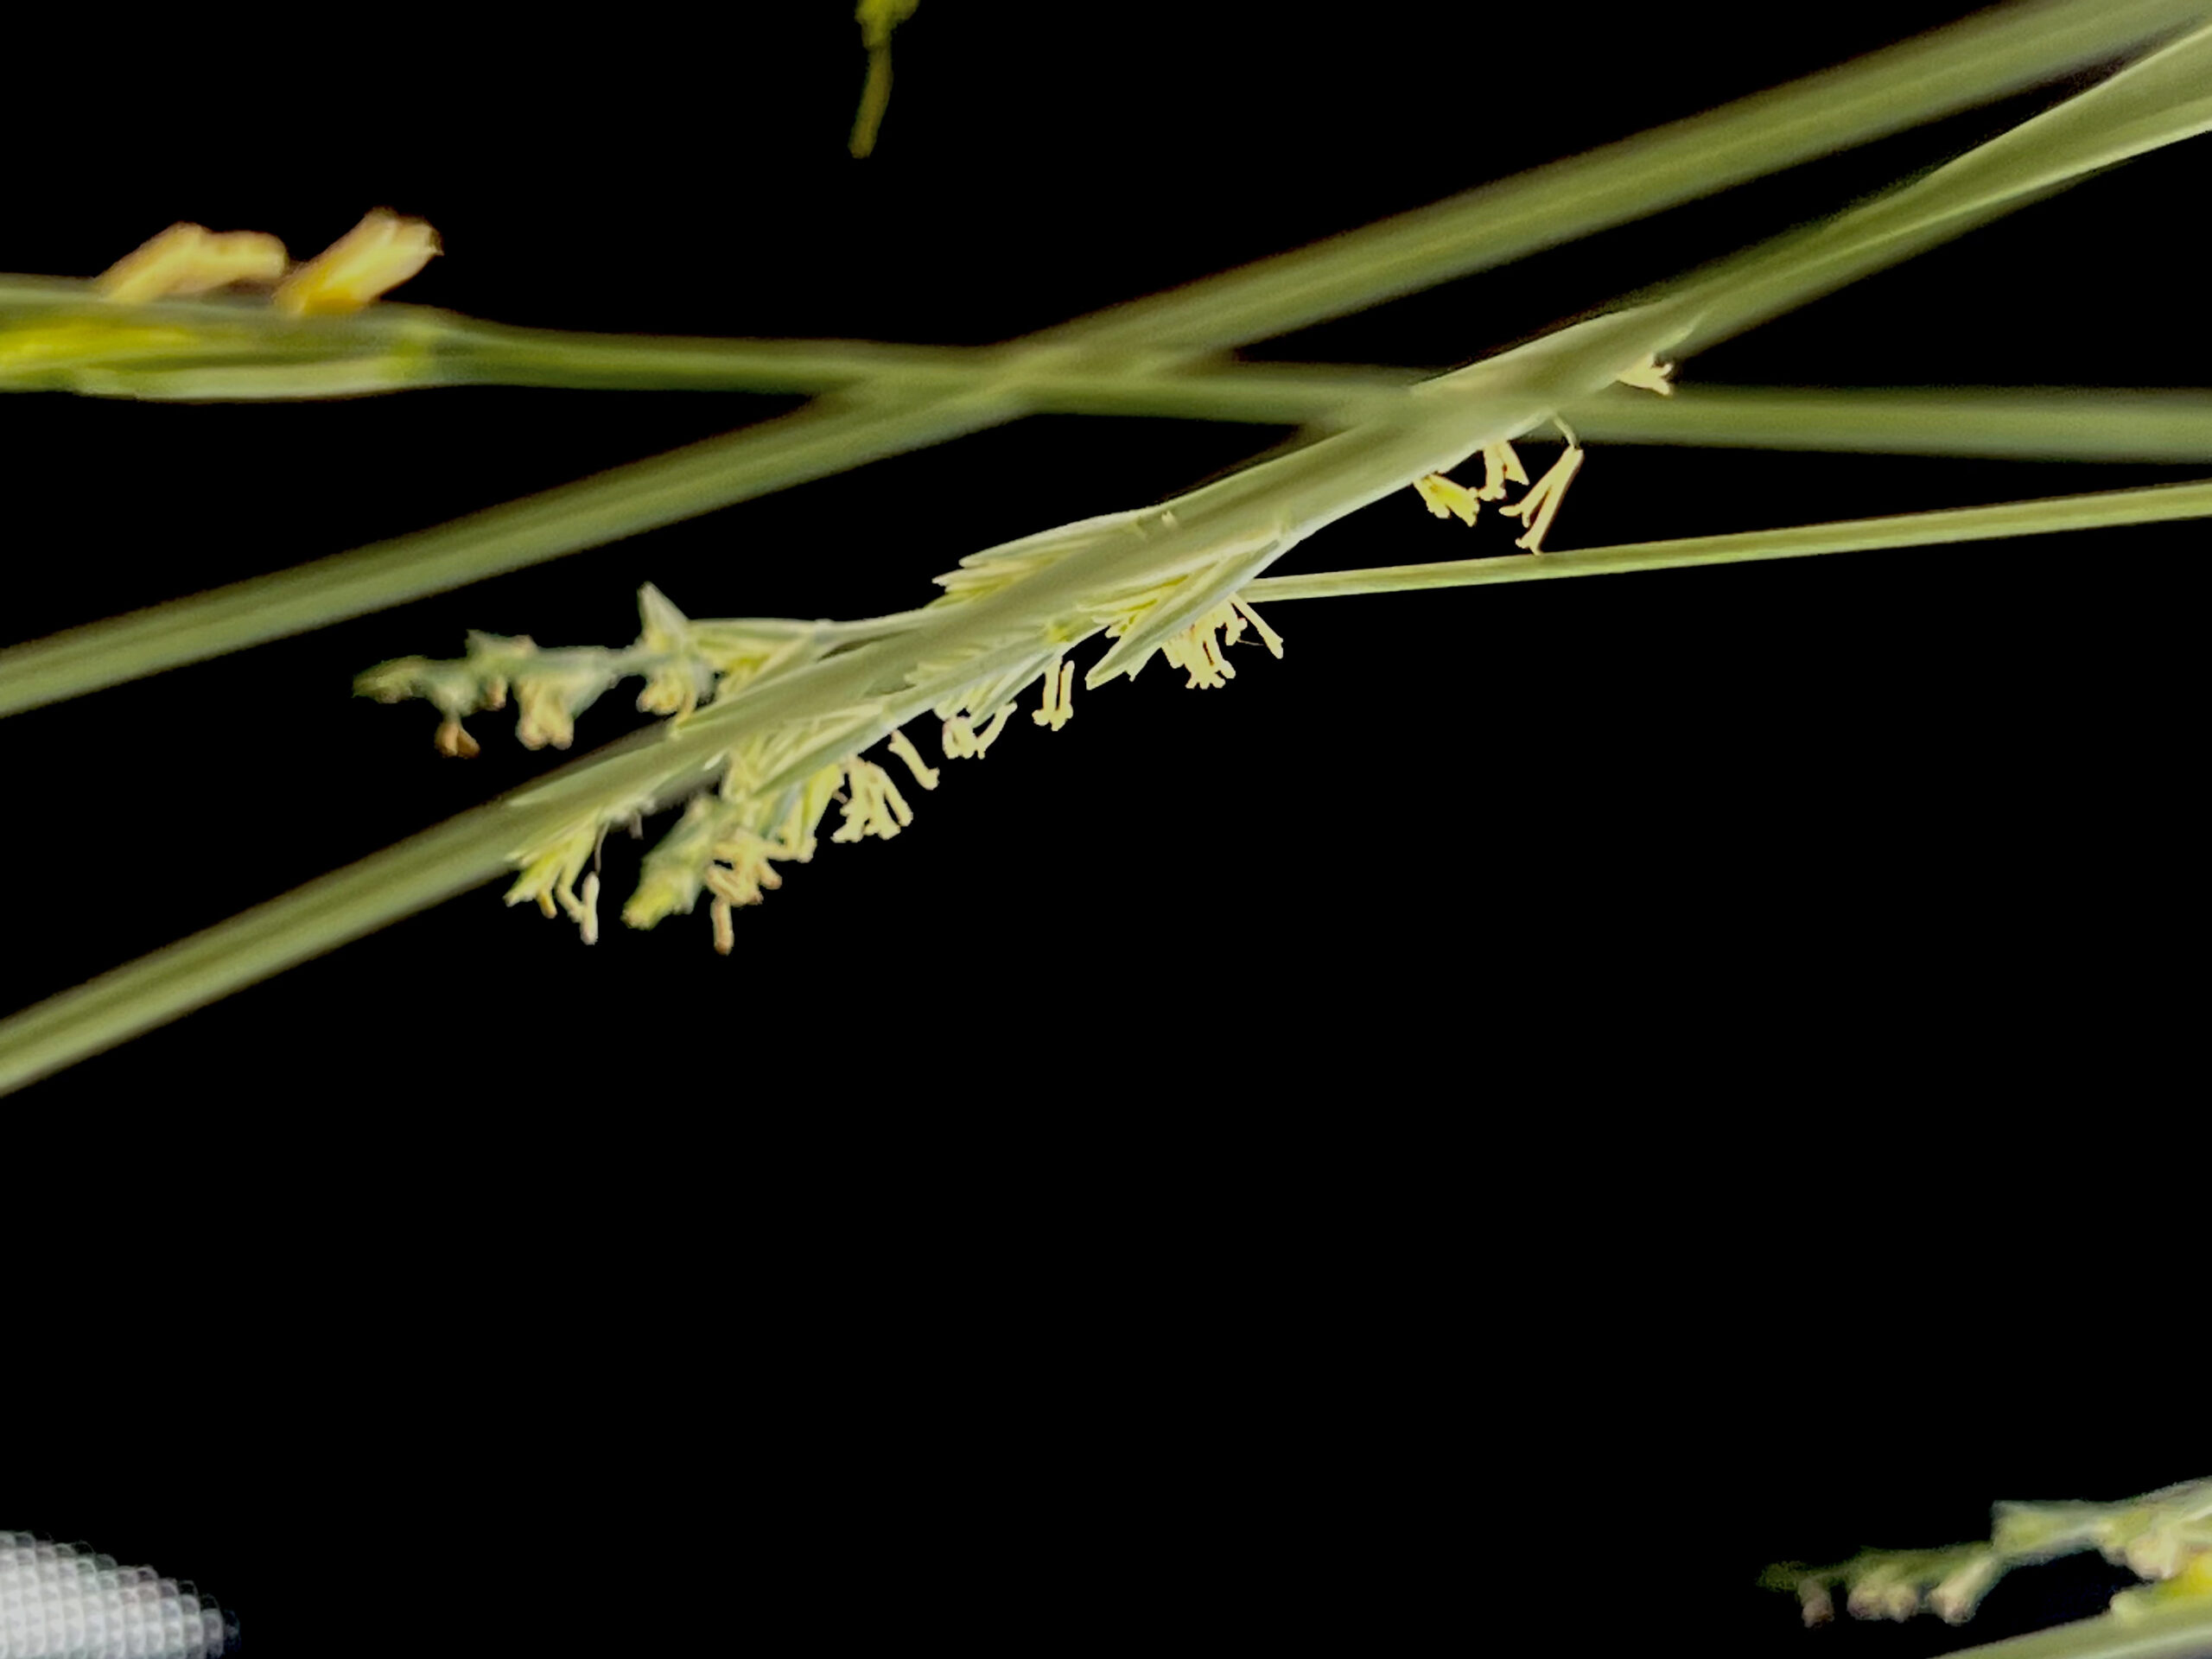 A close up image of veridian grasses against a black background.